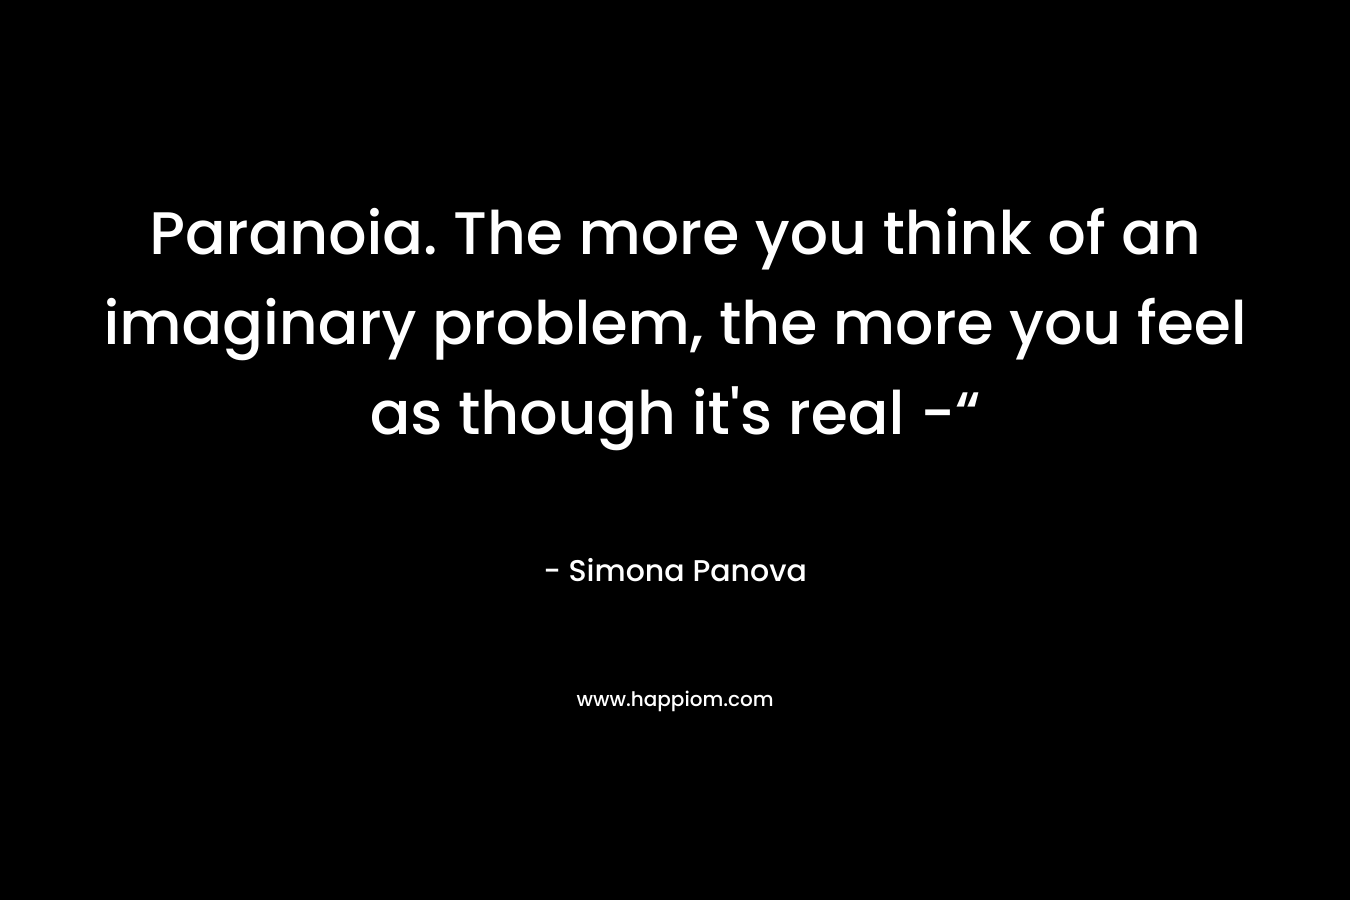 Paranoia. The more you think of an imaginary problem, the more you feel as though it’s real -“ – Simona Panova